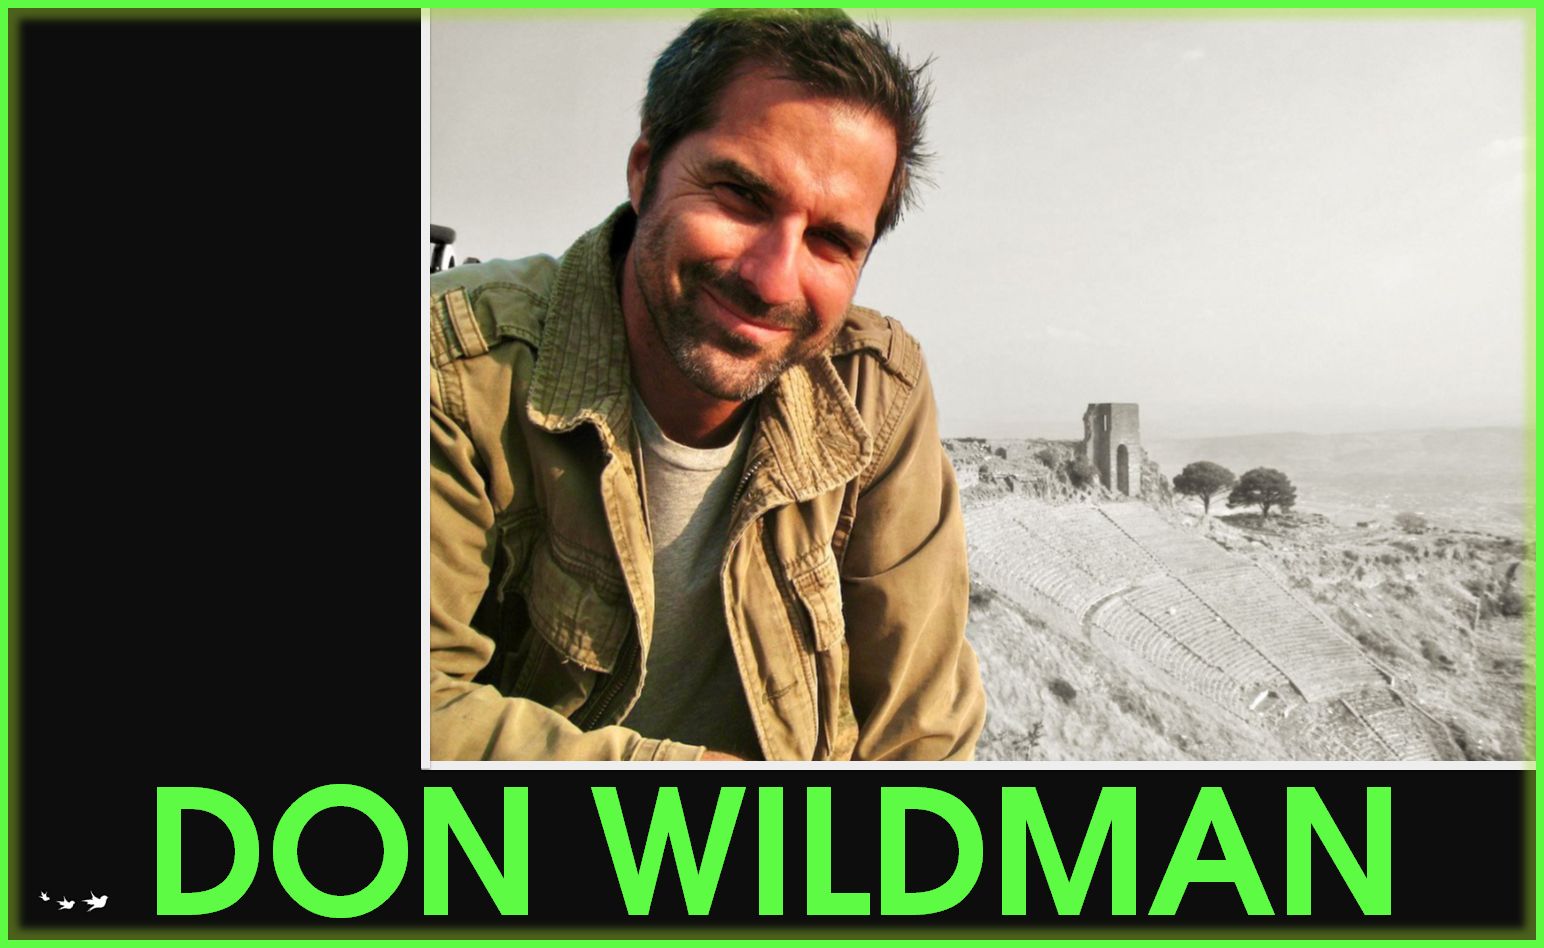 Don Wildman traveling for mysteries podcast interview WEBSITE